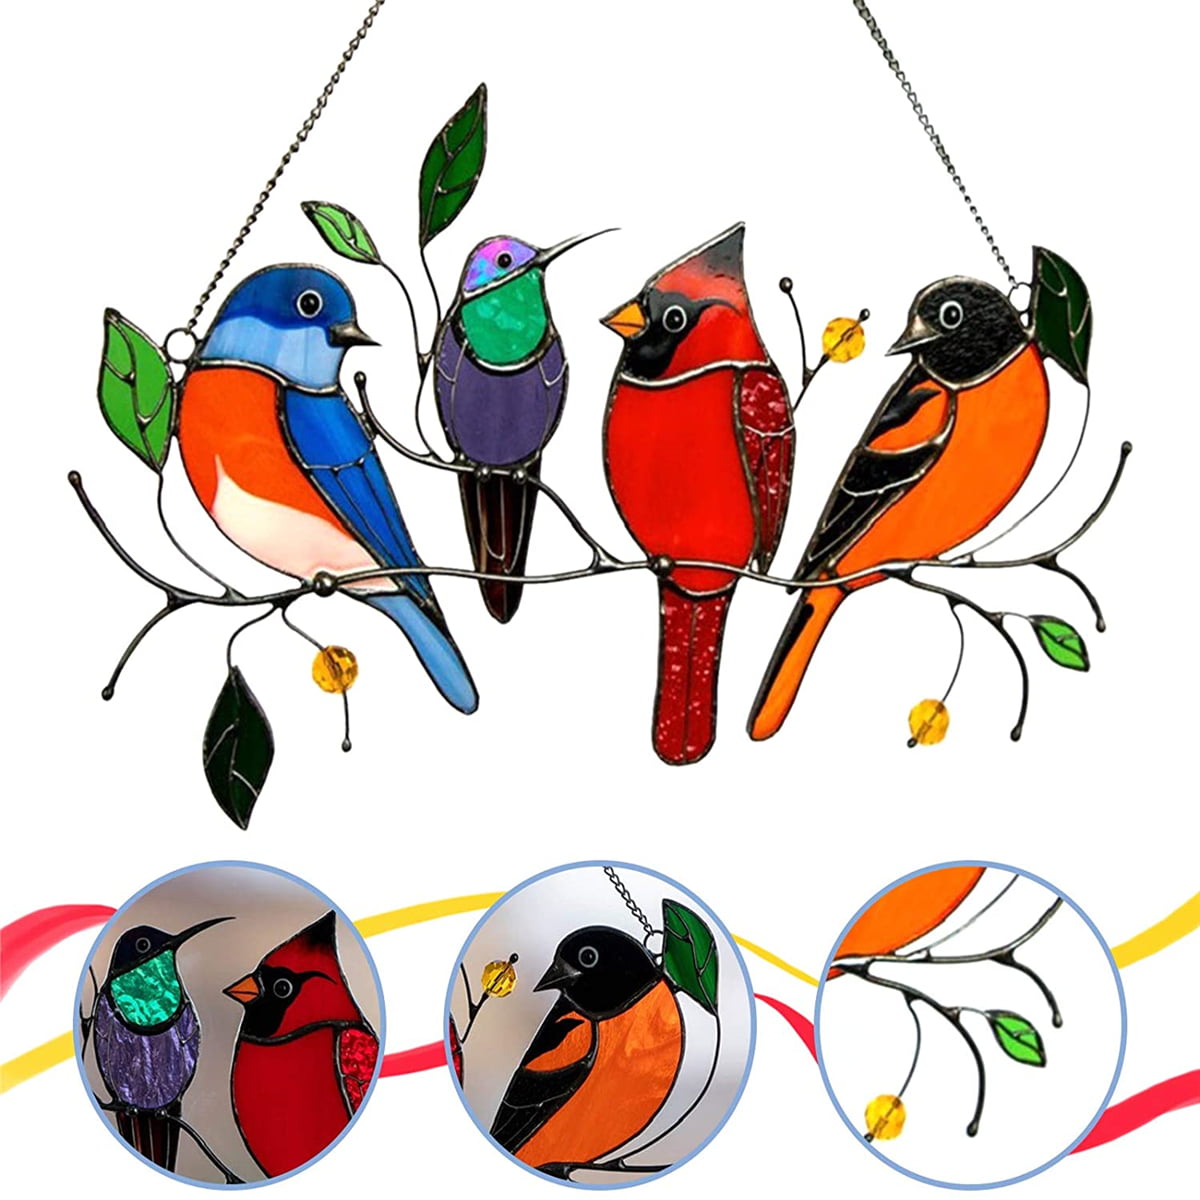 Bird Series Ornaments Pendant Home Decoration Multicolor Birds on a Wire High Stained Glass Suncatcher Window Panel Gifts for Bird Lover for Garden Home 4birds 